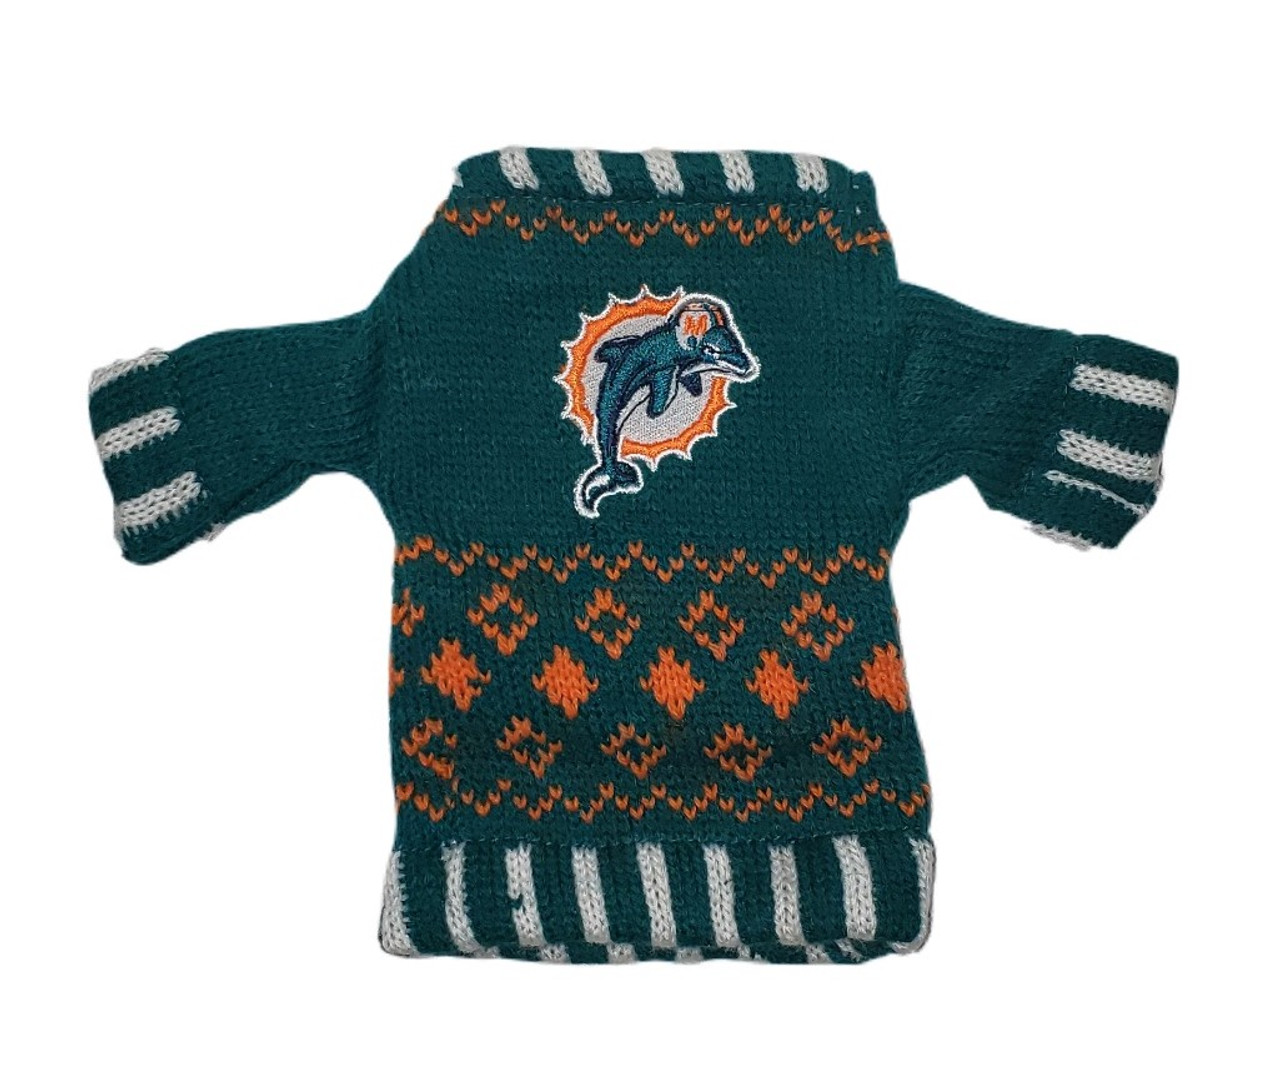 Miami Dolphins NFL Knit Sweater Ornament